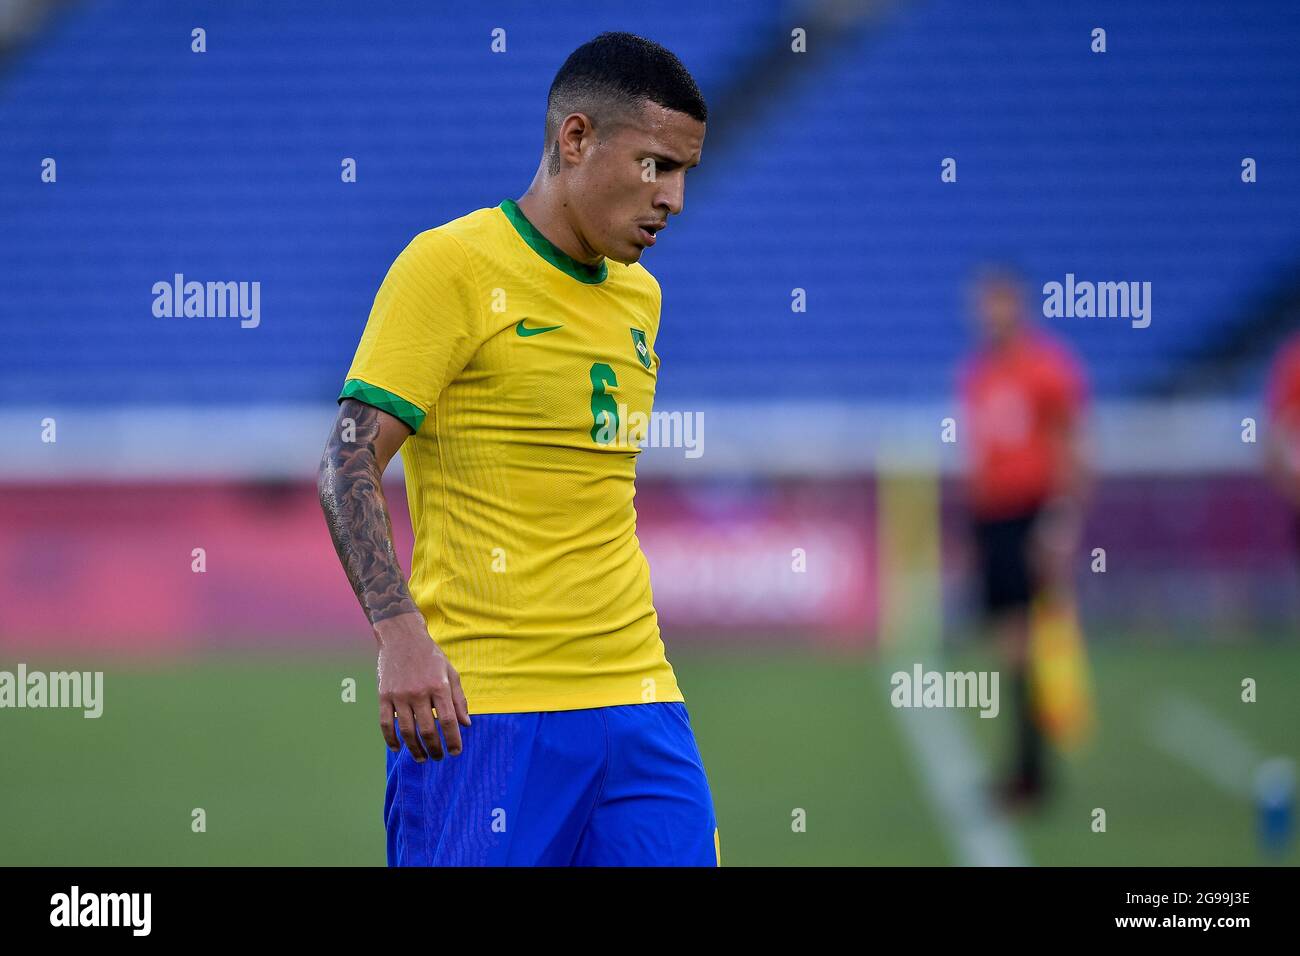 Playing the beautiful game: men's soccer in Brazil – The Gillnetter